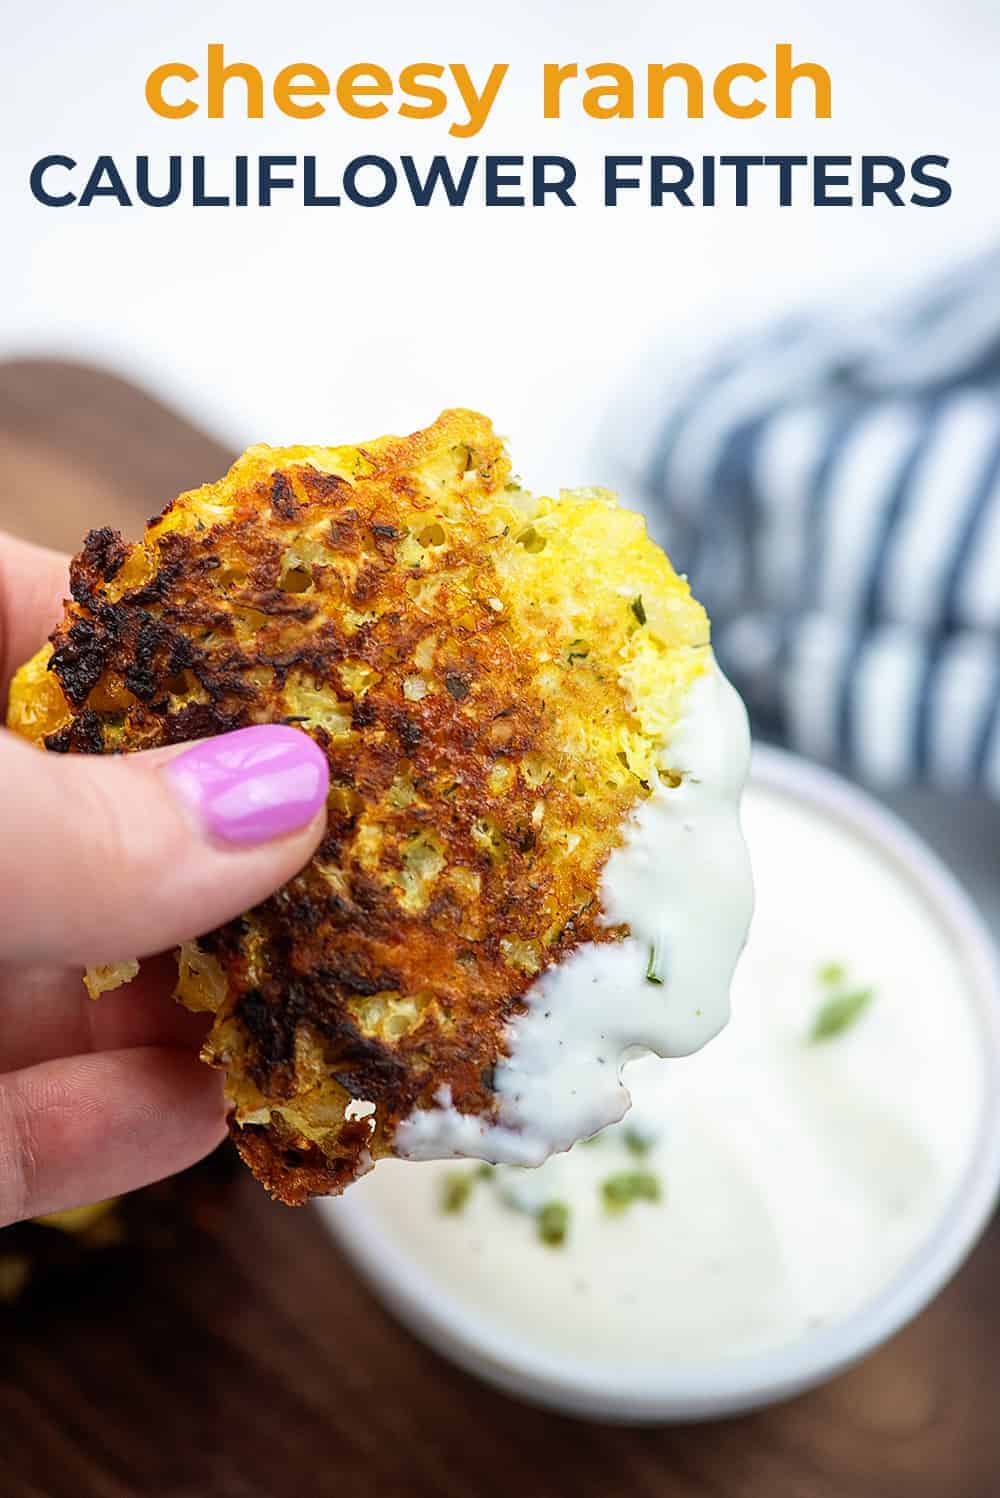 cauliflower fritter dipped in ranch dressing